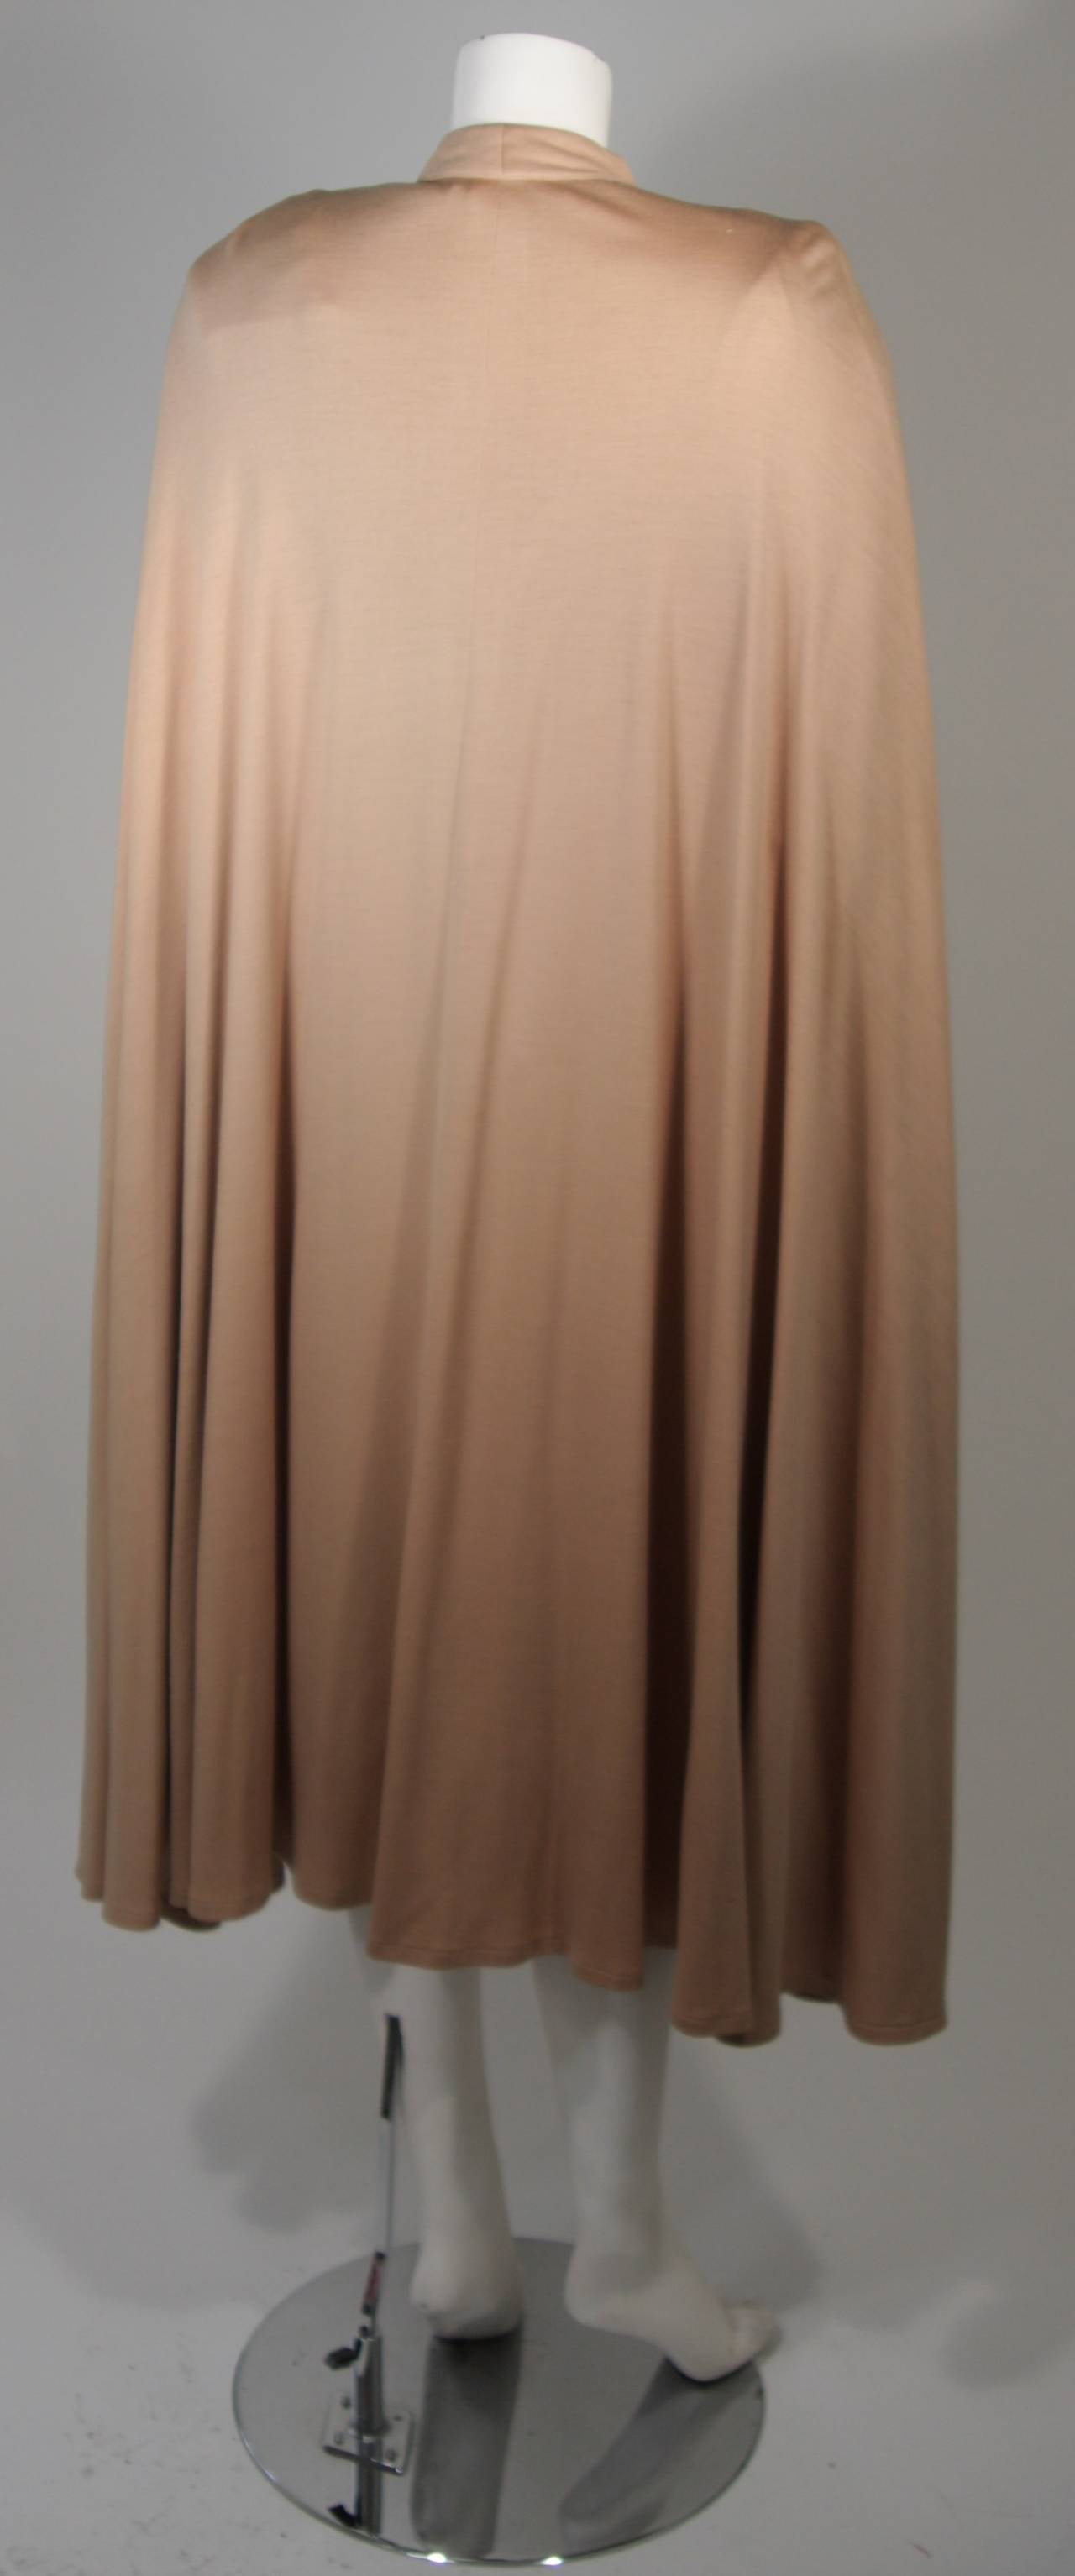 Nolan Miller Attributed Camel Wool Cape and Cocktail Dress Size Small 4